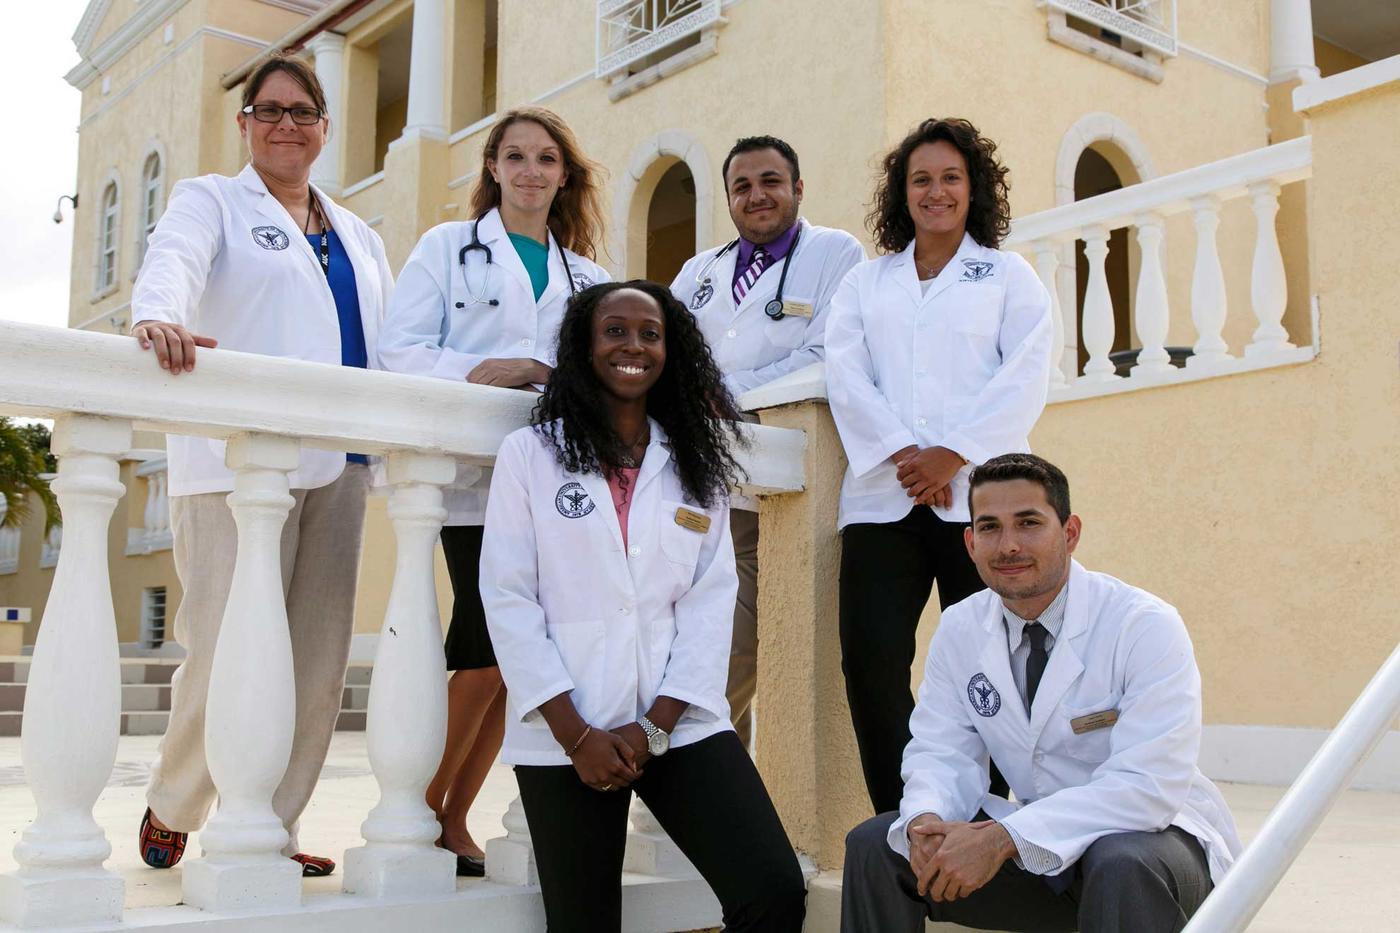 Group picture of AUC students in white coats